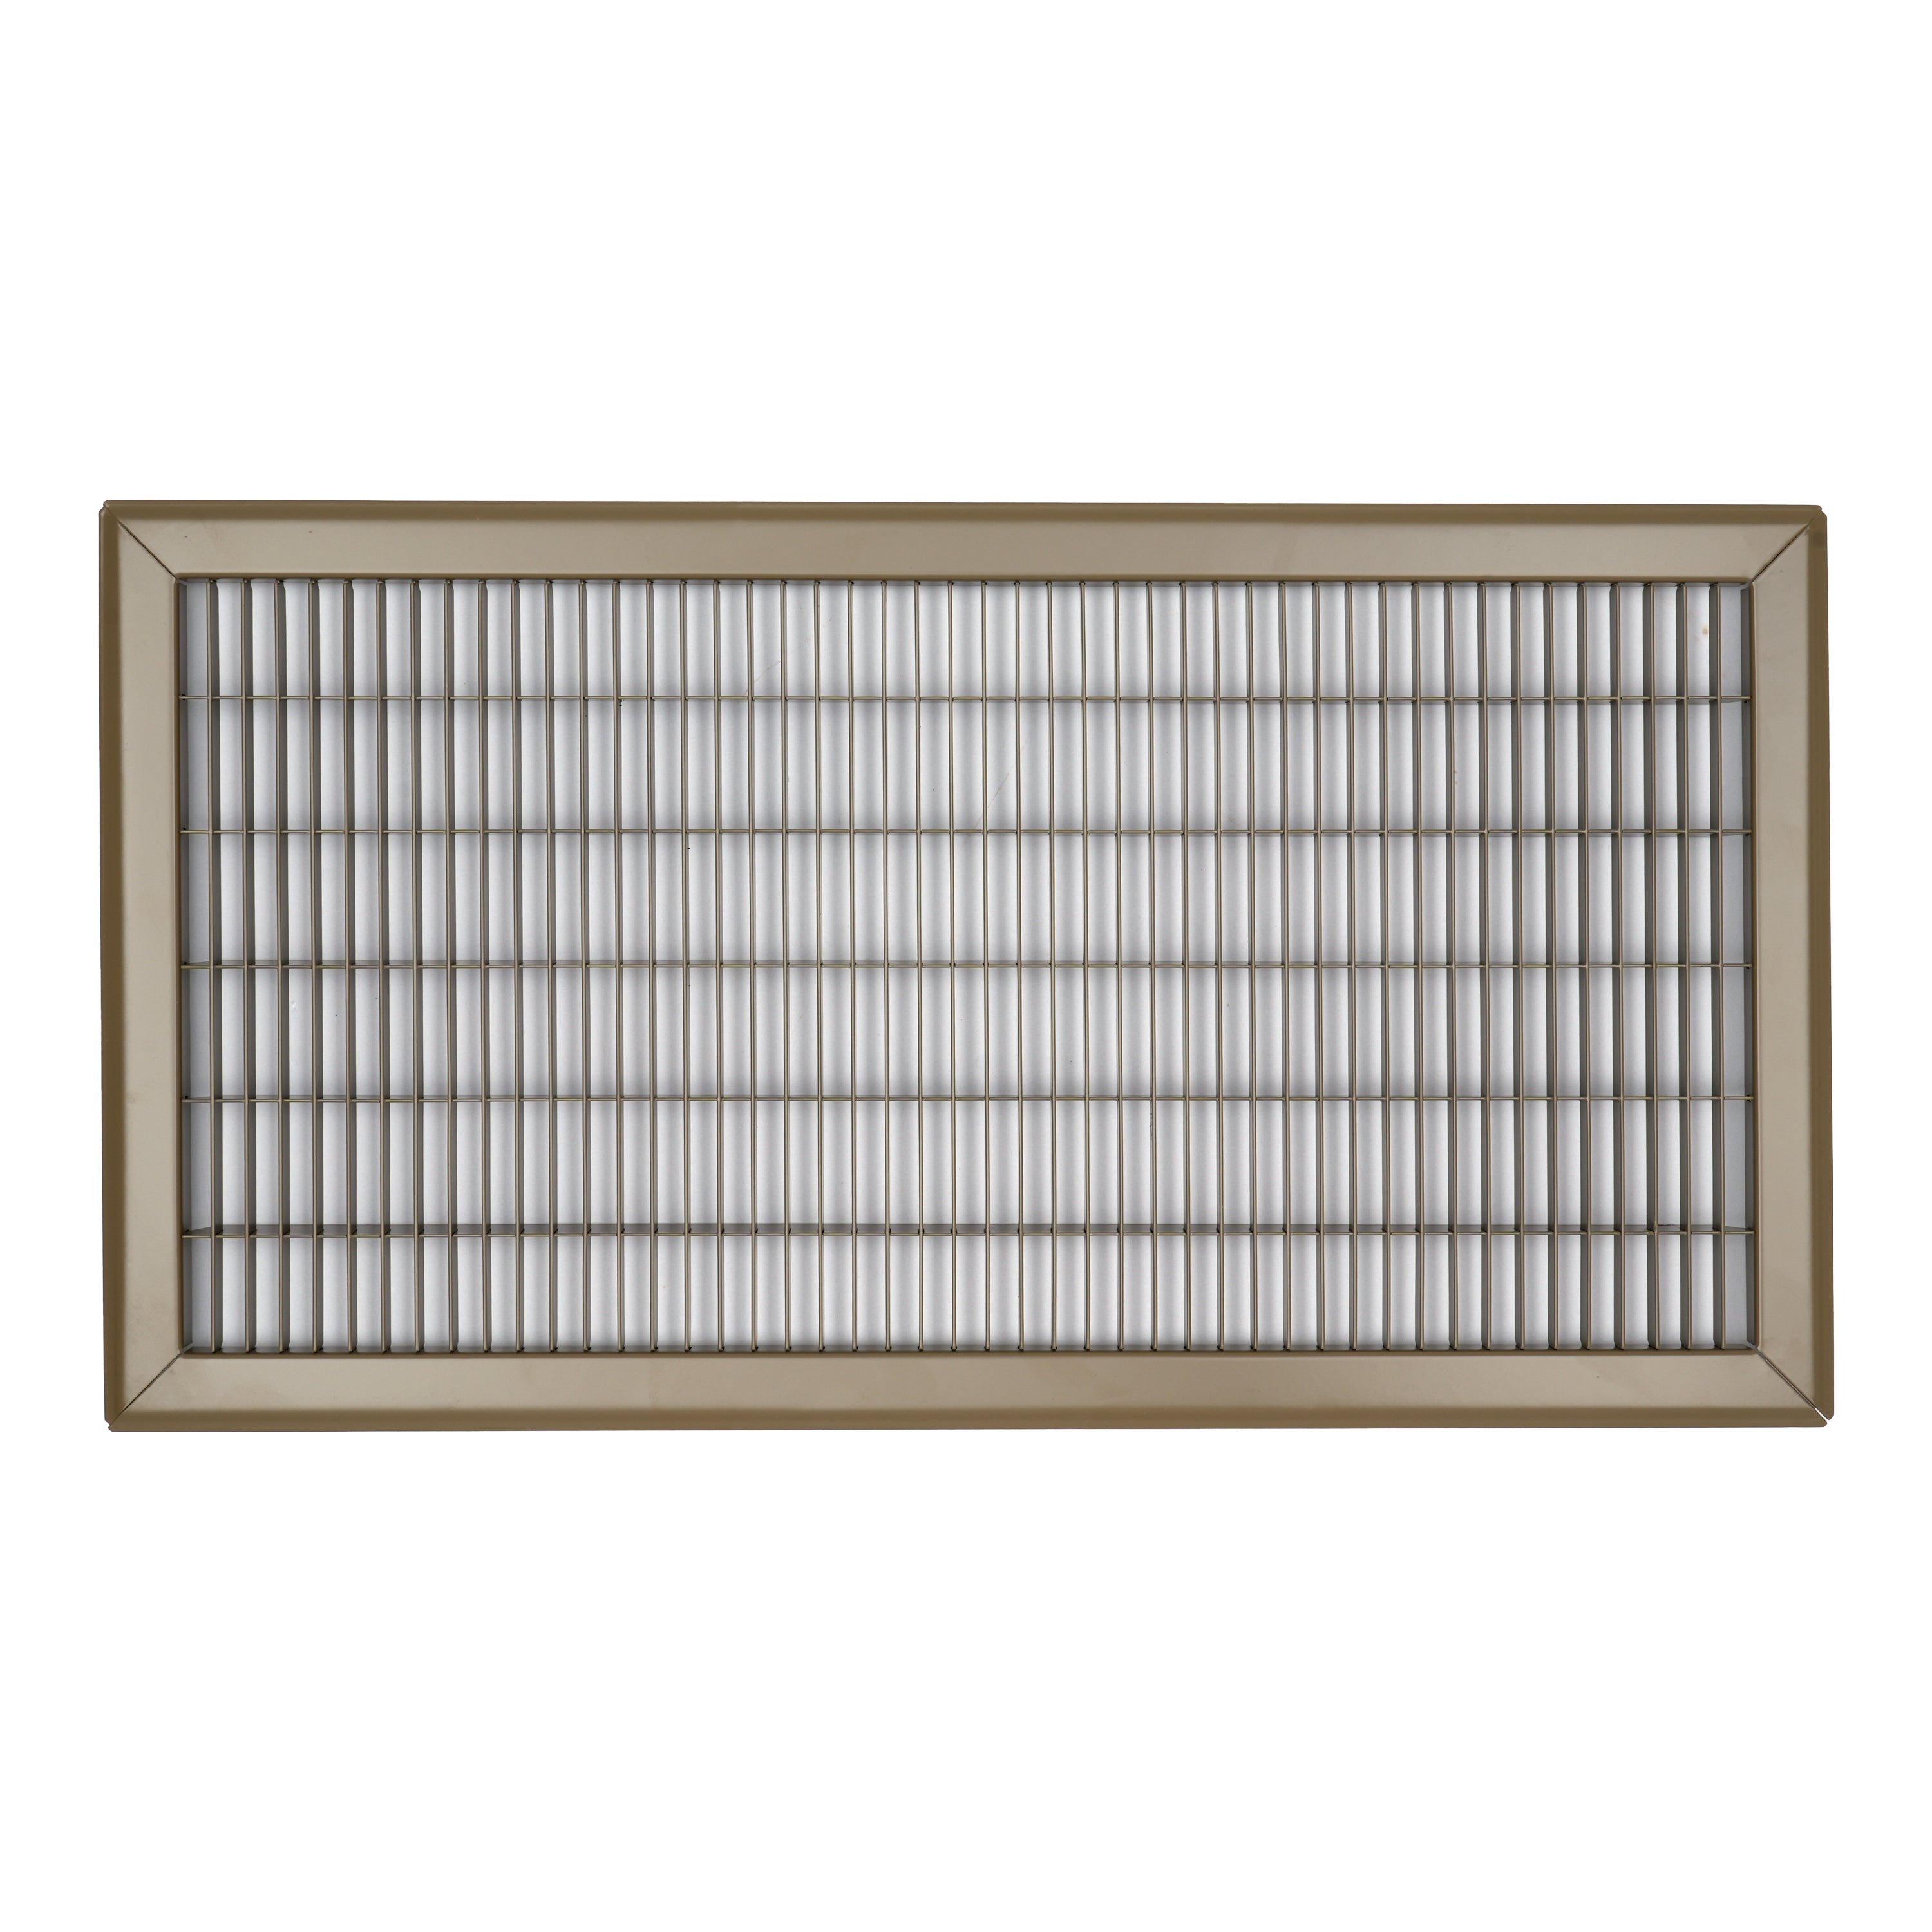 12"W x 24"H [Duct Opening] Return Air Floor Grille | Vent Cover Grill for Floor - Brown| Outer Dimensions: 13.75"W X 25.75"H